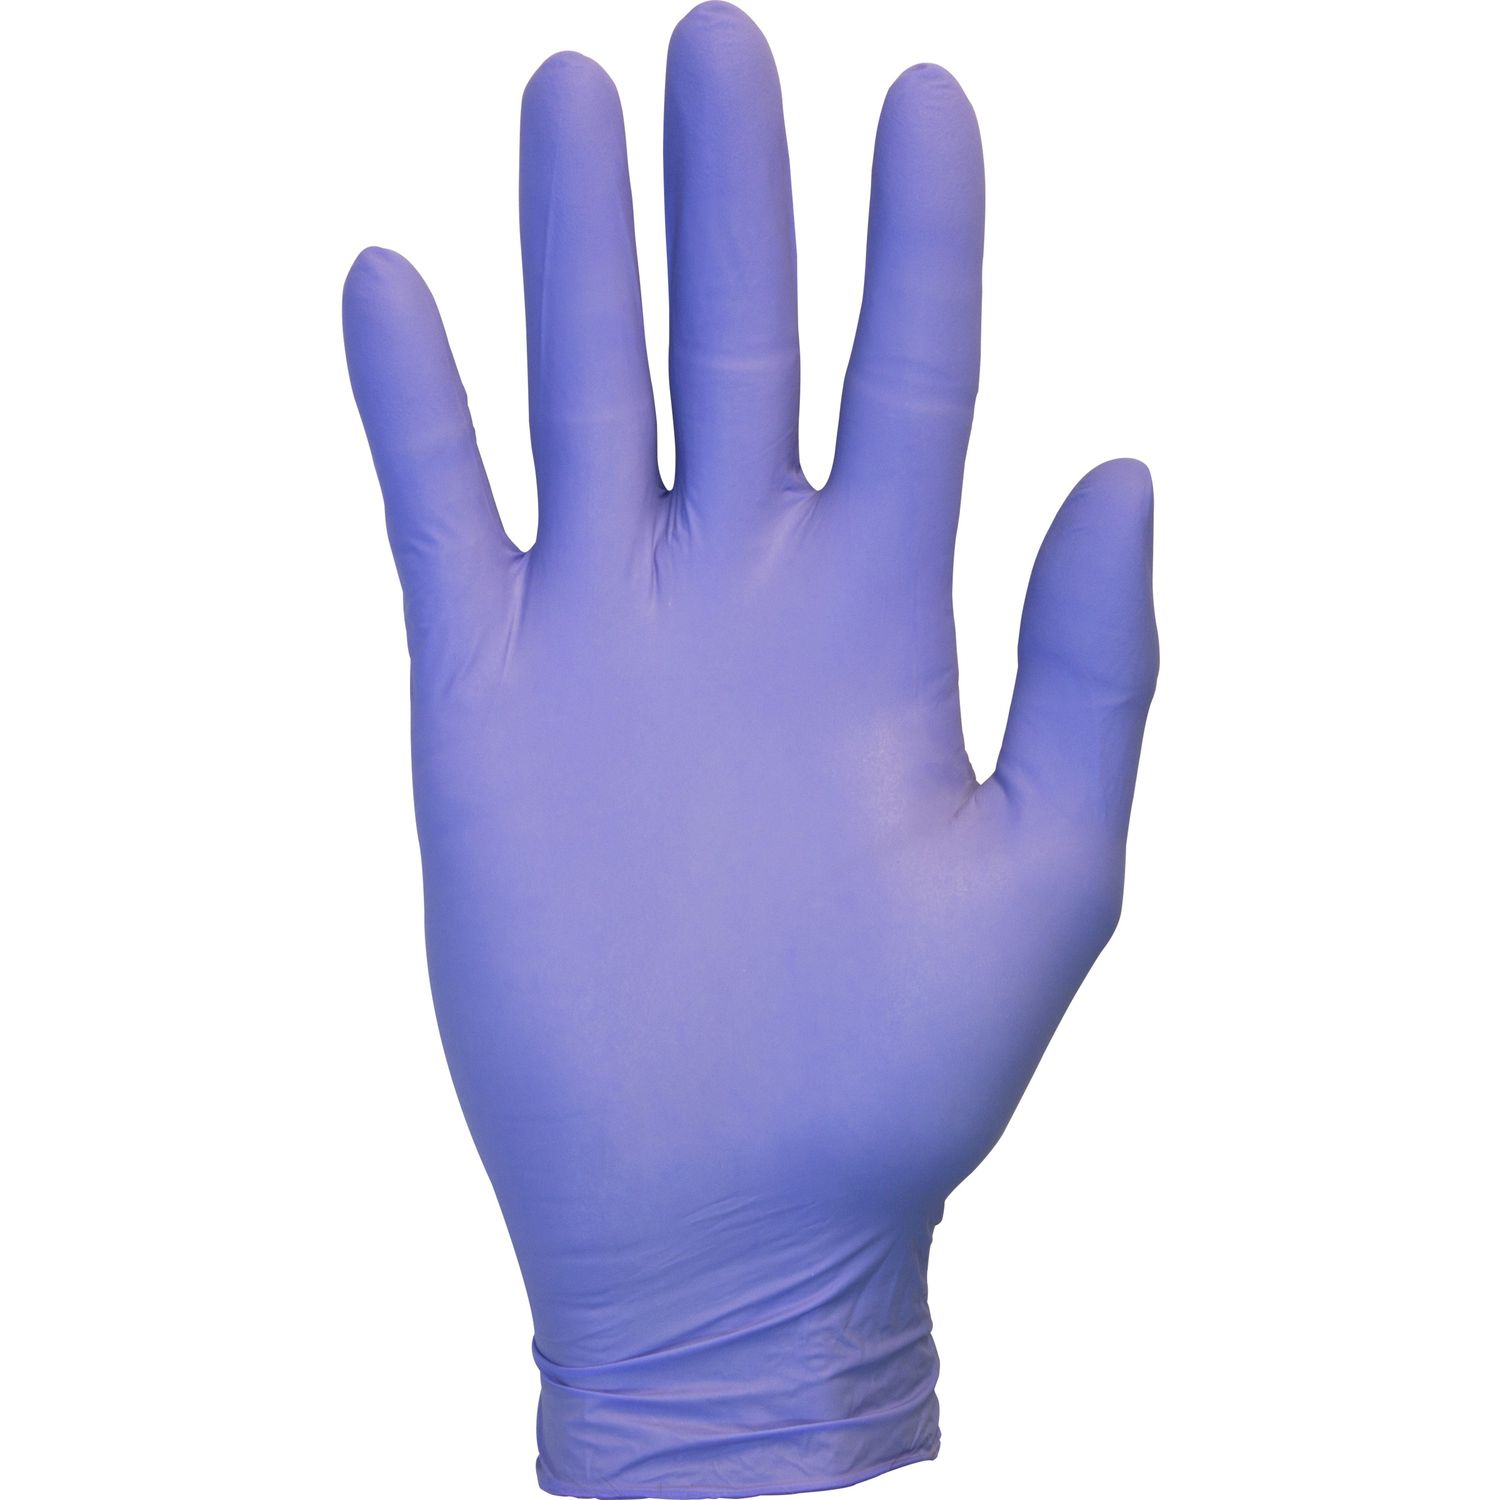 Powder Free Indigo Nitrile Gloves XXL Size, Nitrile, Indigo, Powder-free, Comfortable, Allergen-free, Silicone-free, Latex-free, For Cleaning, Dishwashing, Food, Janitorial Use, Painting, Pet Care